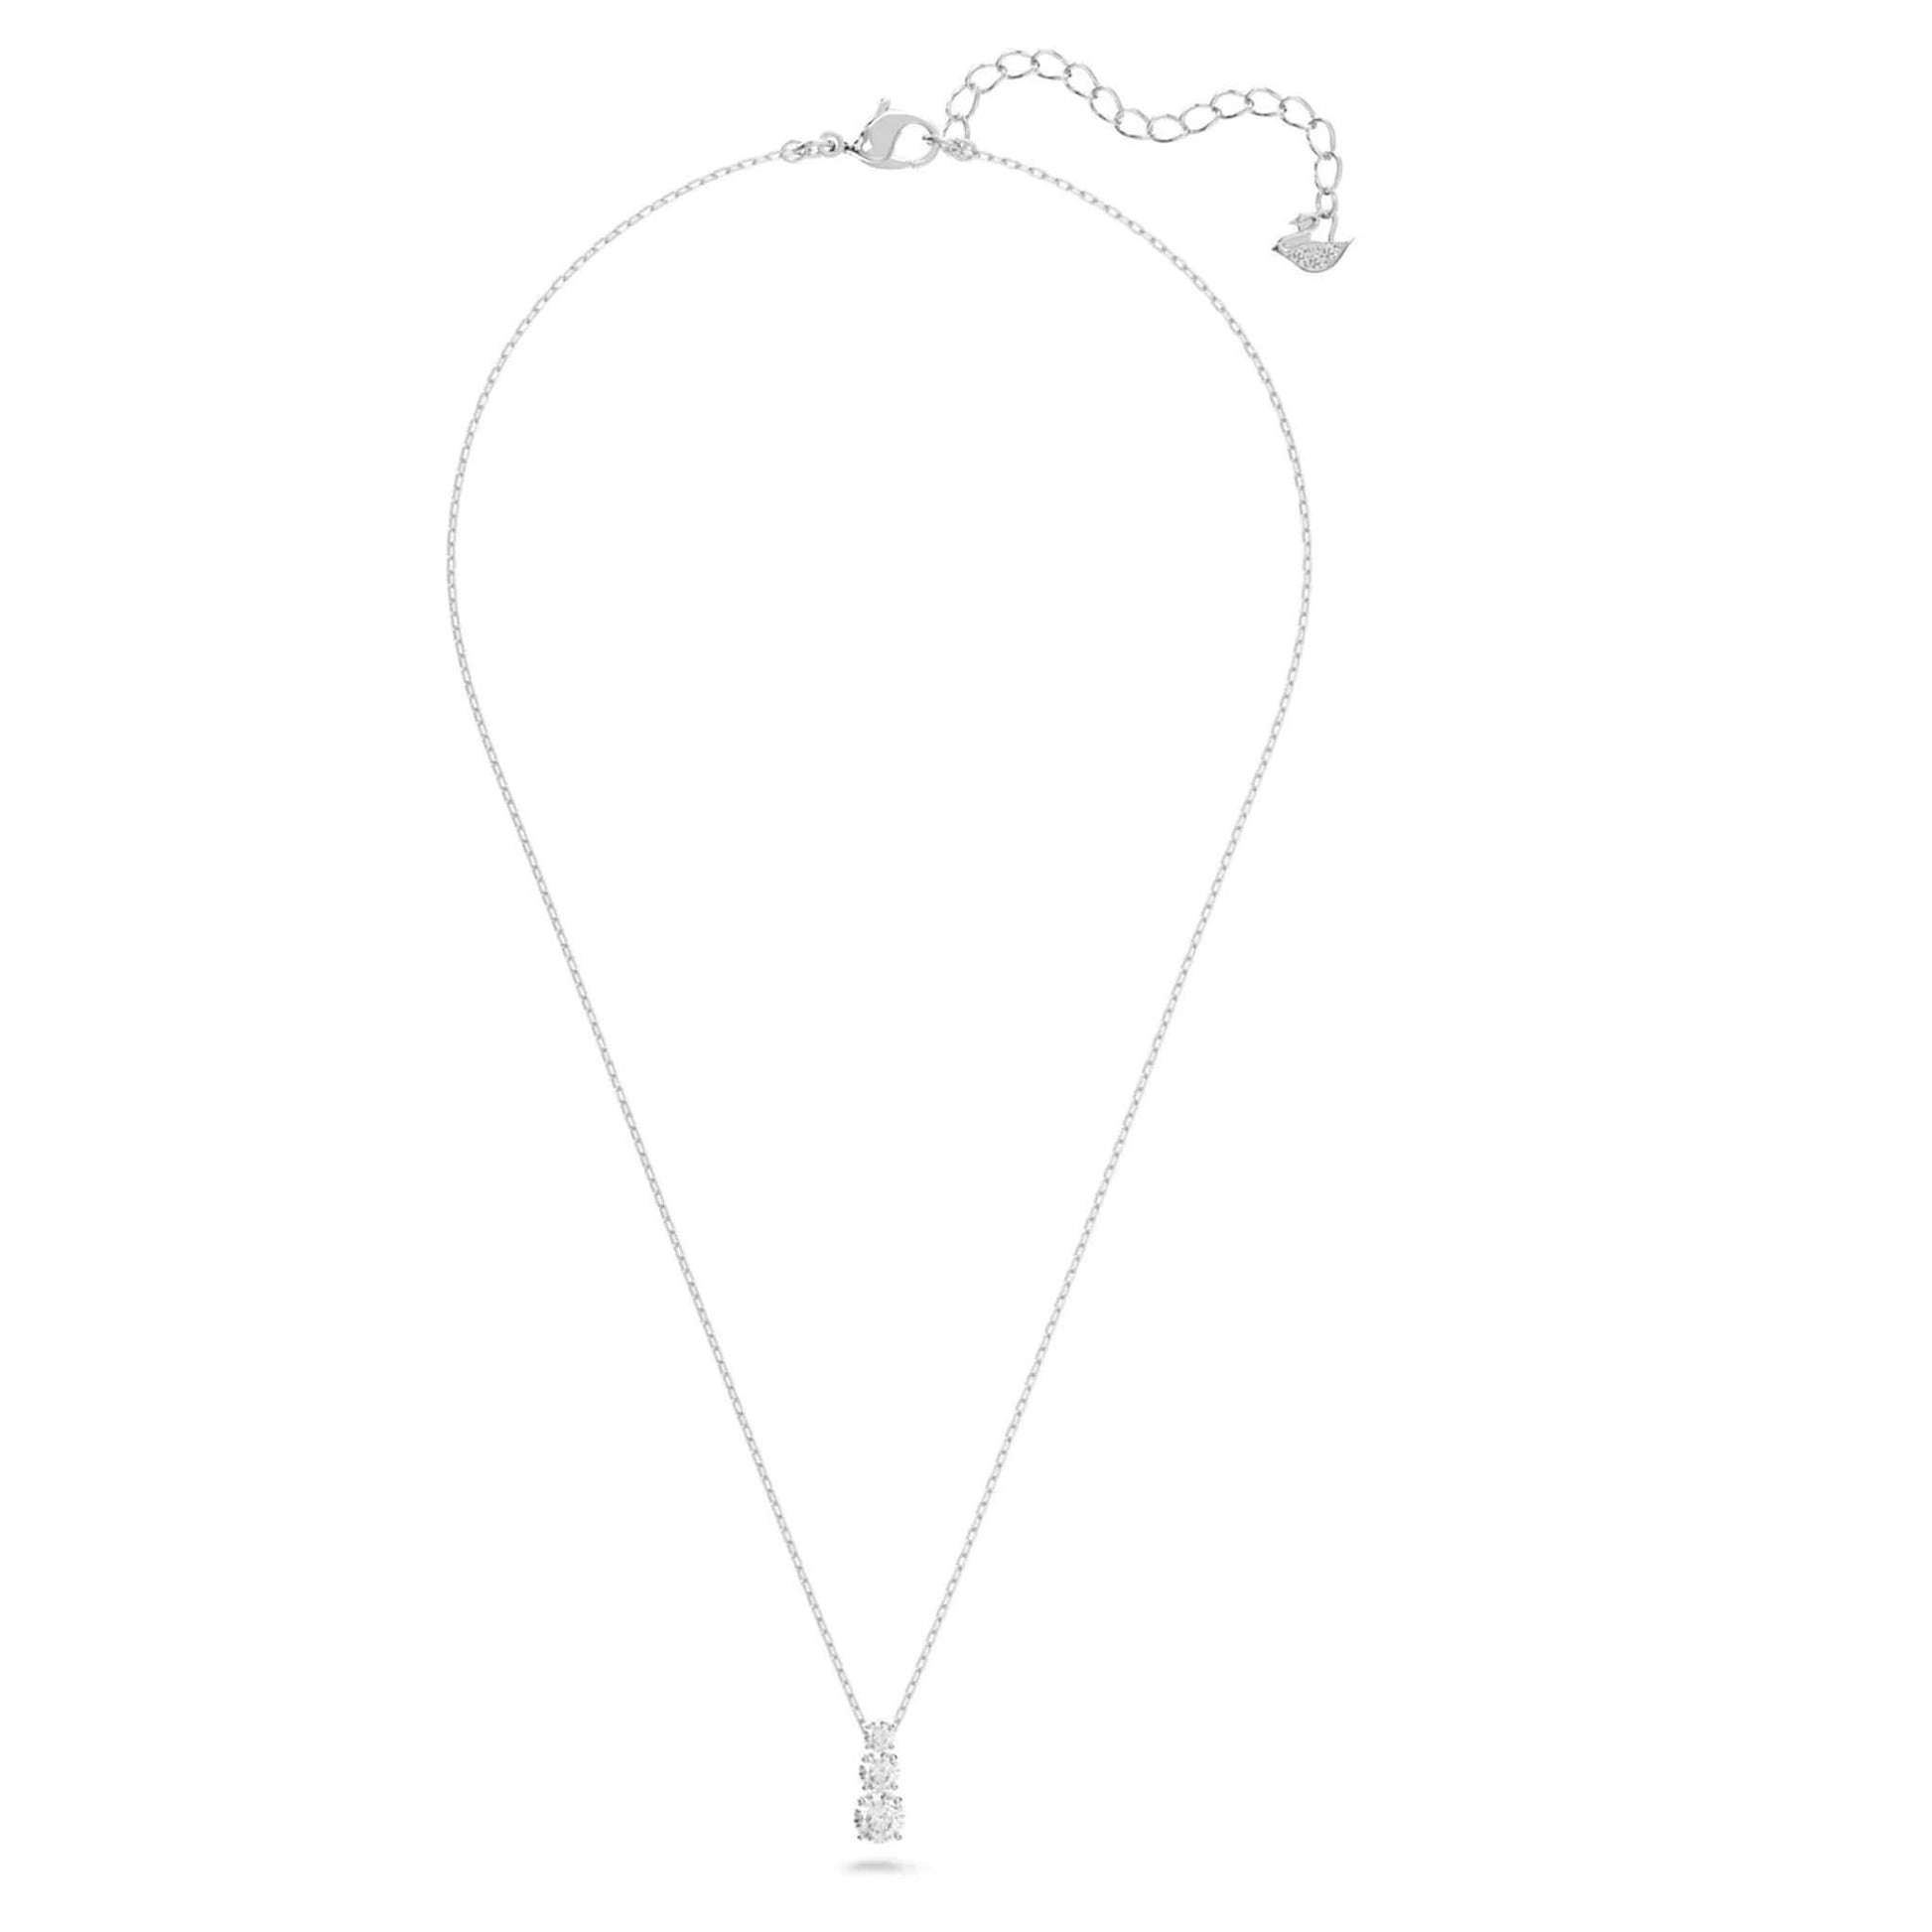 Attract Trilogy pendant - Cosmos Boutique New Jersey